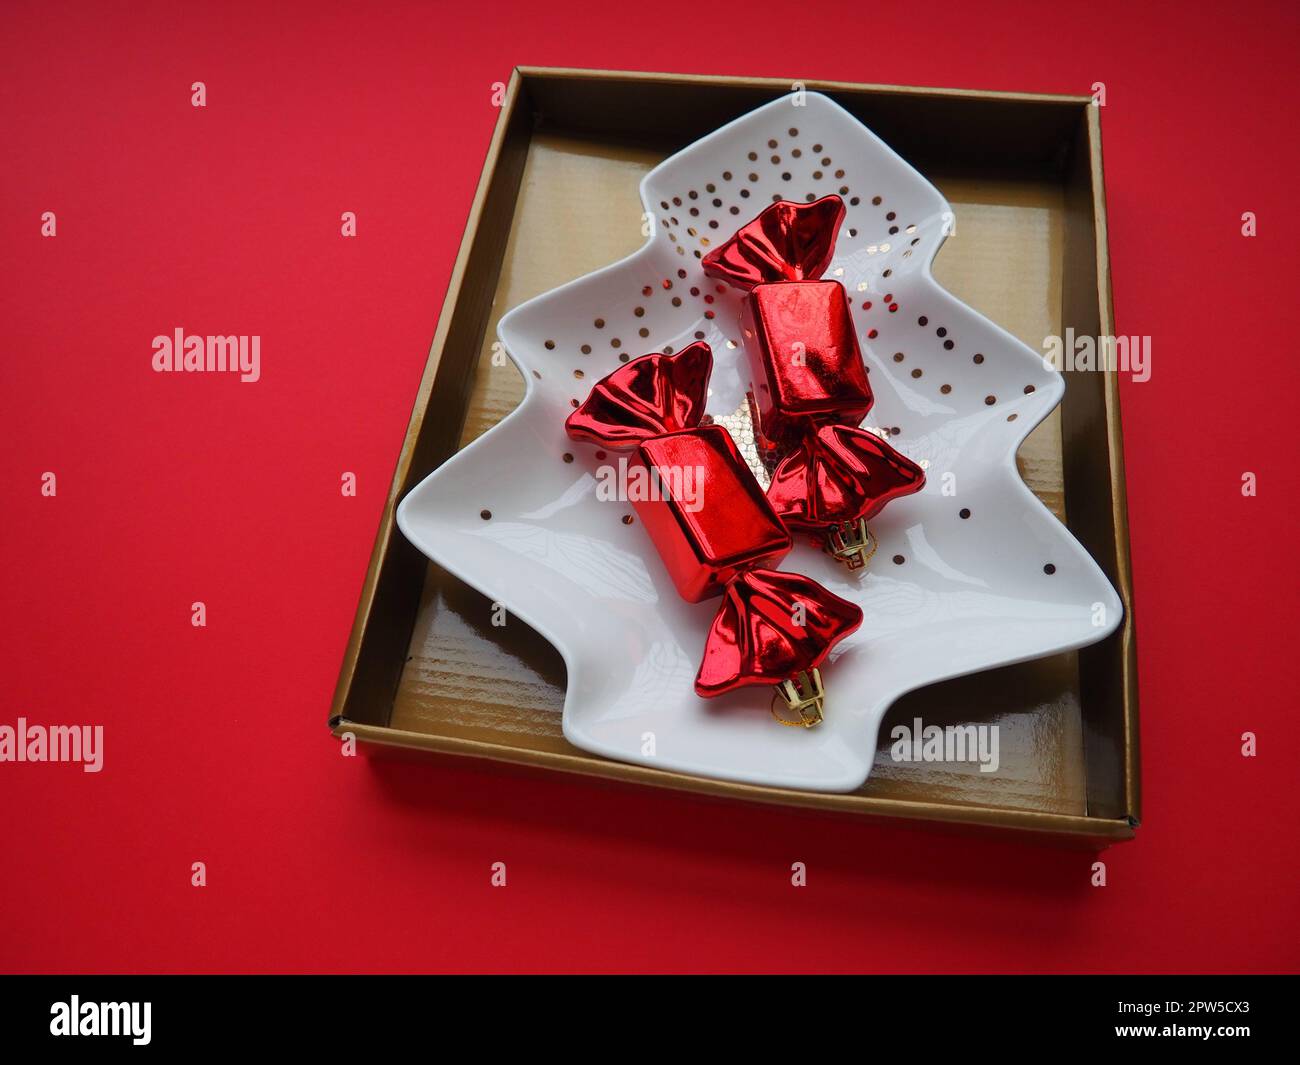 A plate in the shape of a Christmas tree with gold ornaments and a star in the middle. Gift wrapping. Red background. Candy in a red wrapper. Backdrop Stock Photo